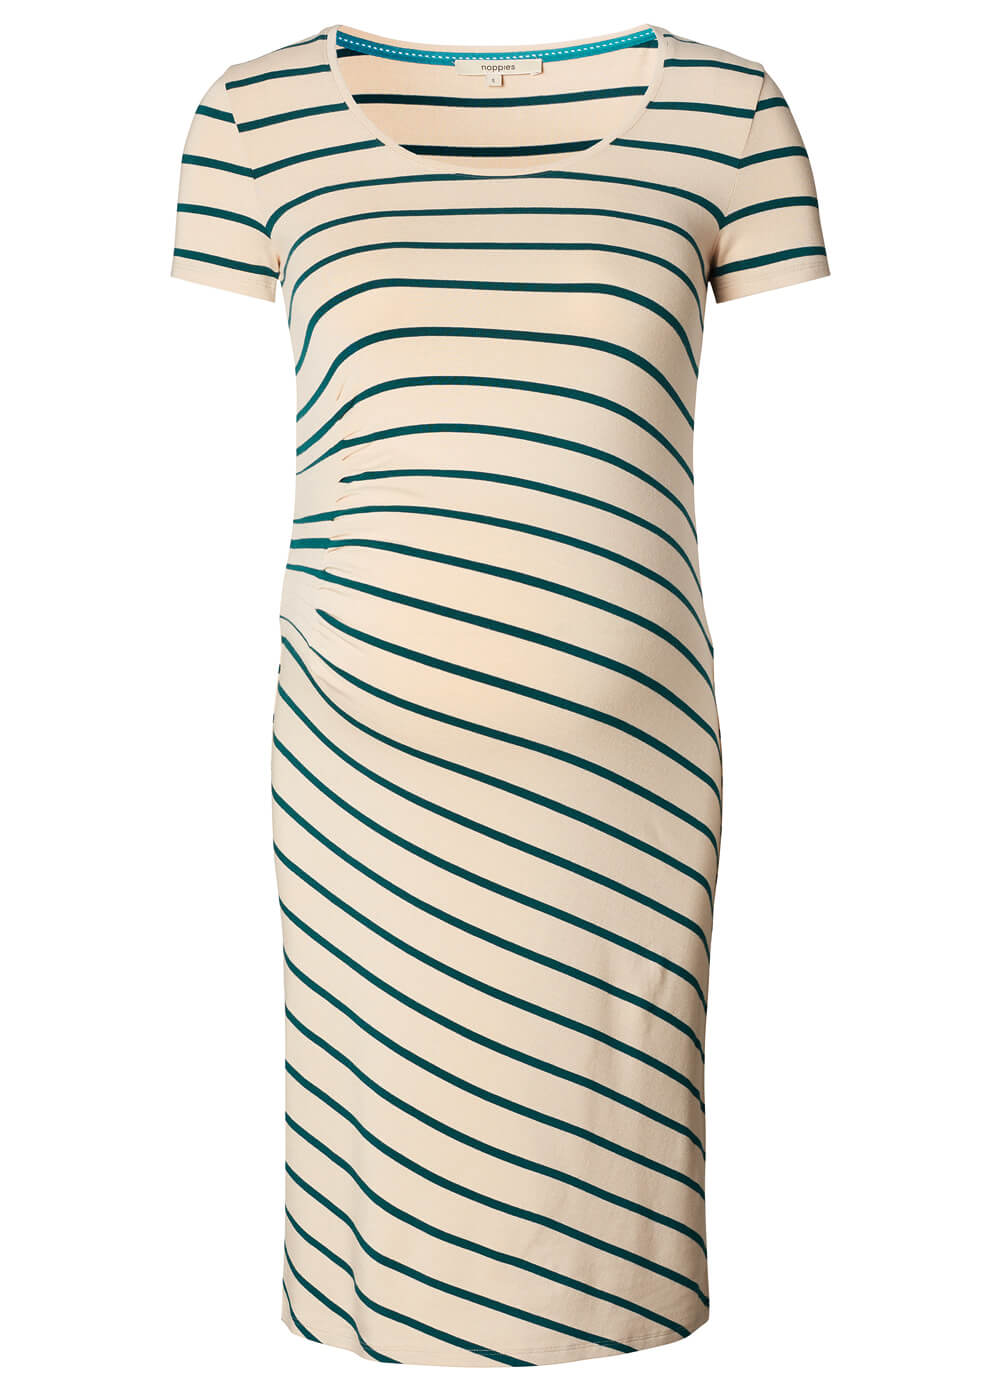 Lotus Maternity Dress in Green Stripes by Noppies